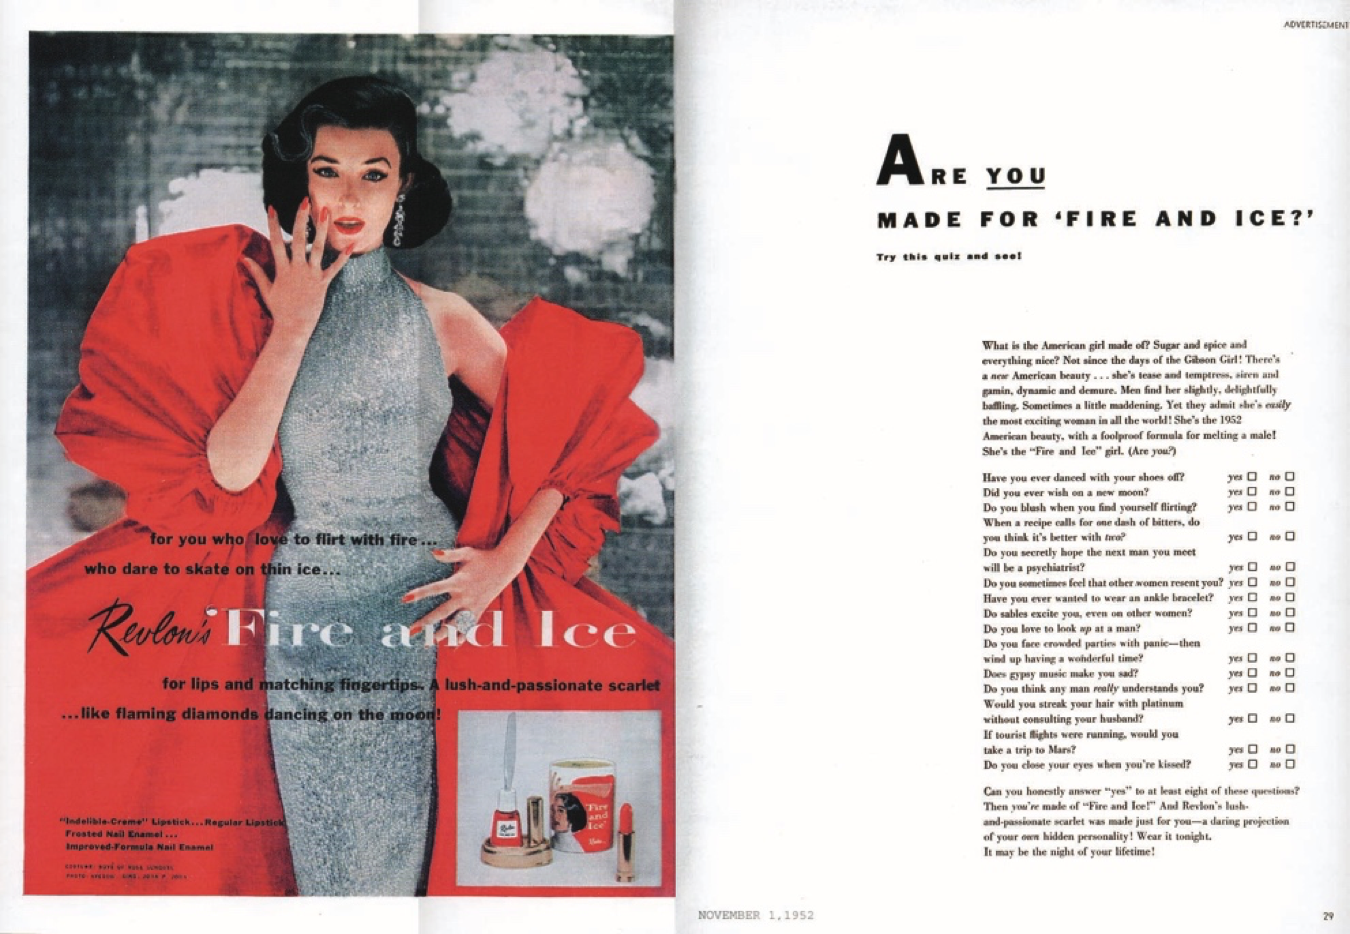 Revlon’s breakout magazine advertising campaigns from 1952, Fire and Ice